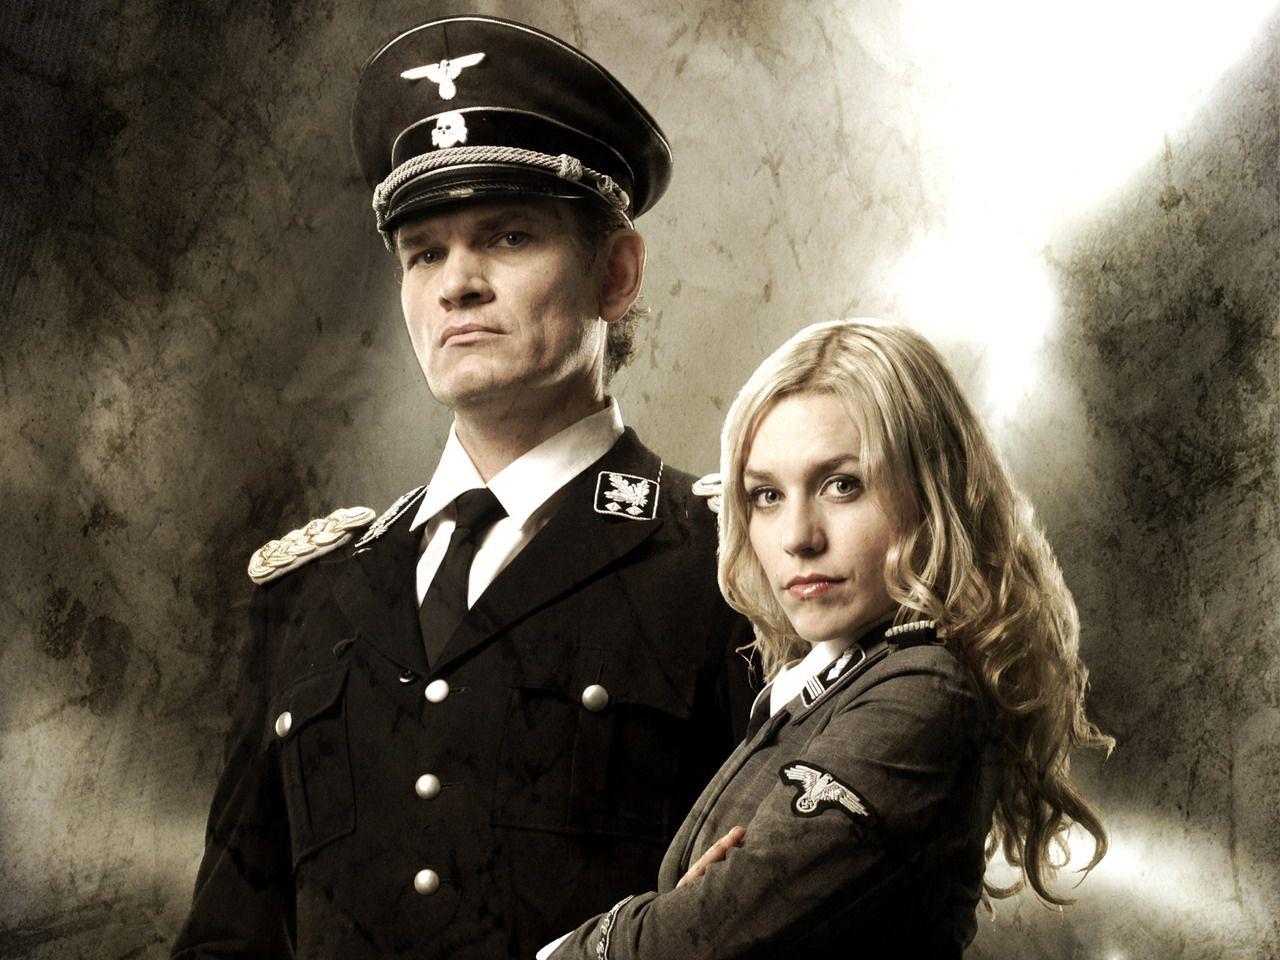 Iron Sky image iron sky HD wallpaper and background photo